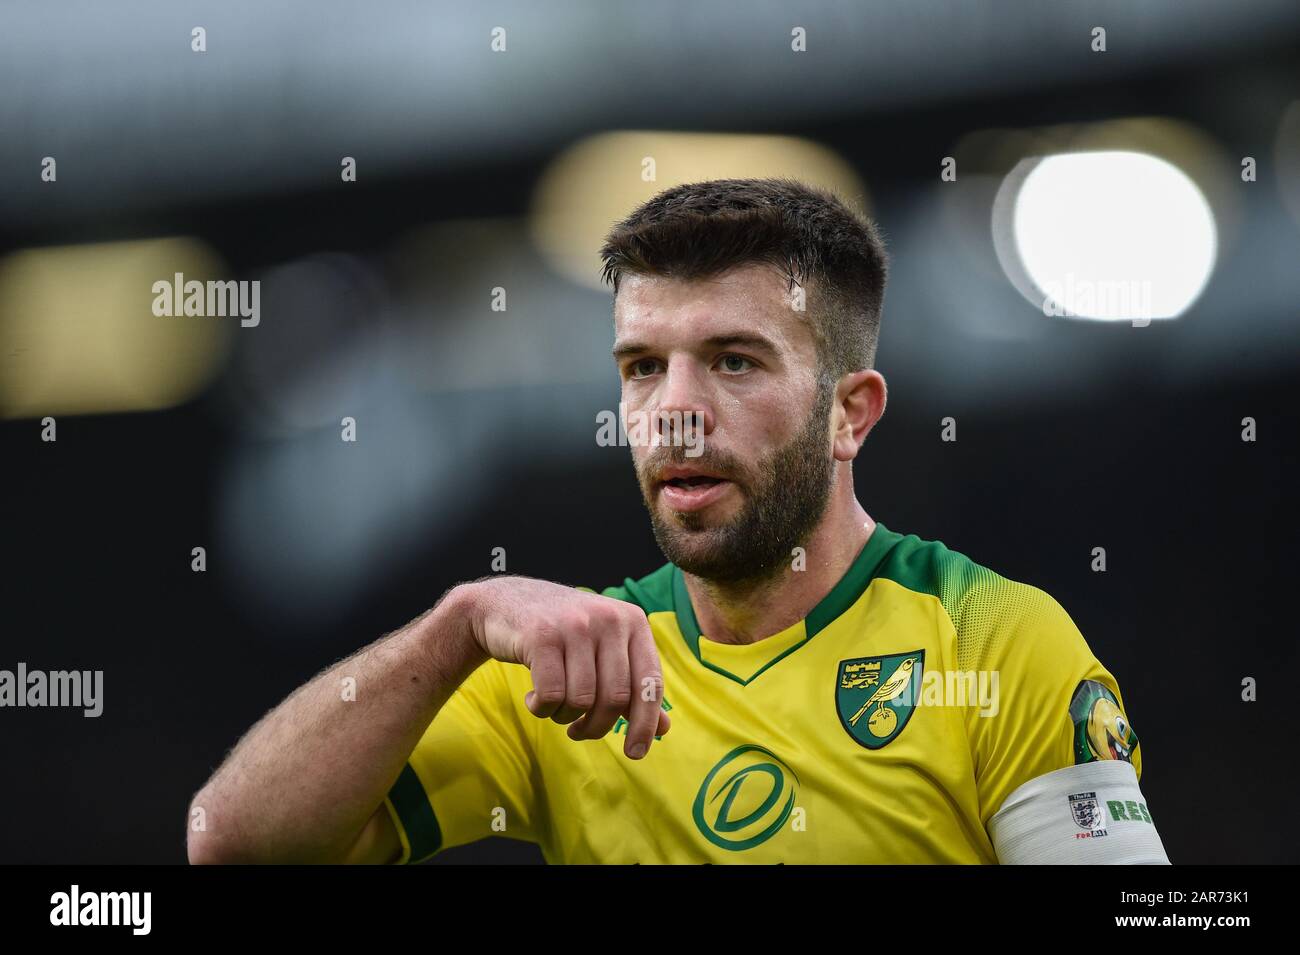 25th January 2020, Turf Moor, Burnley, England; Emirates FA Cup, Burnley v Norwich City : Goal scorer Grant Hanley (5) of Norwich City during the game Stock Photo